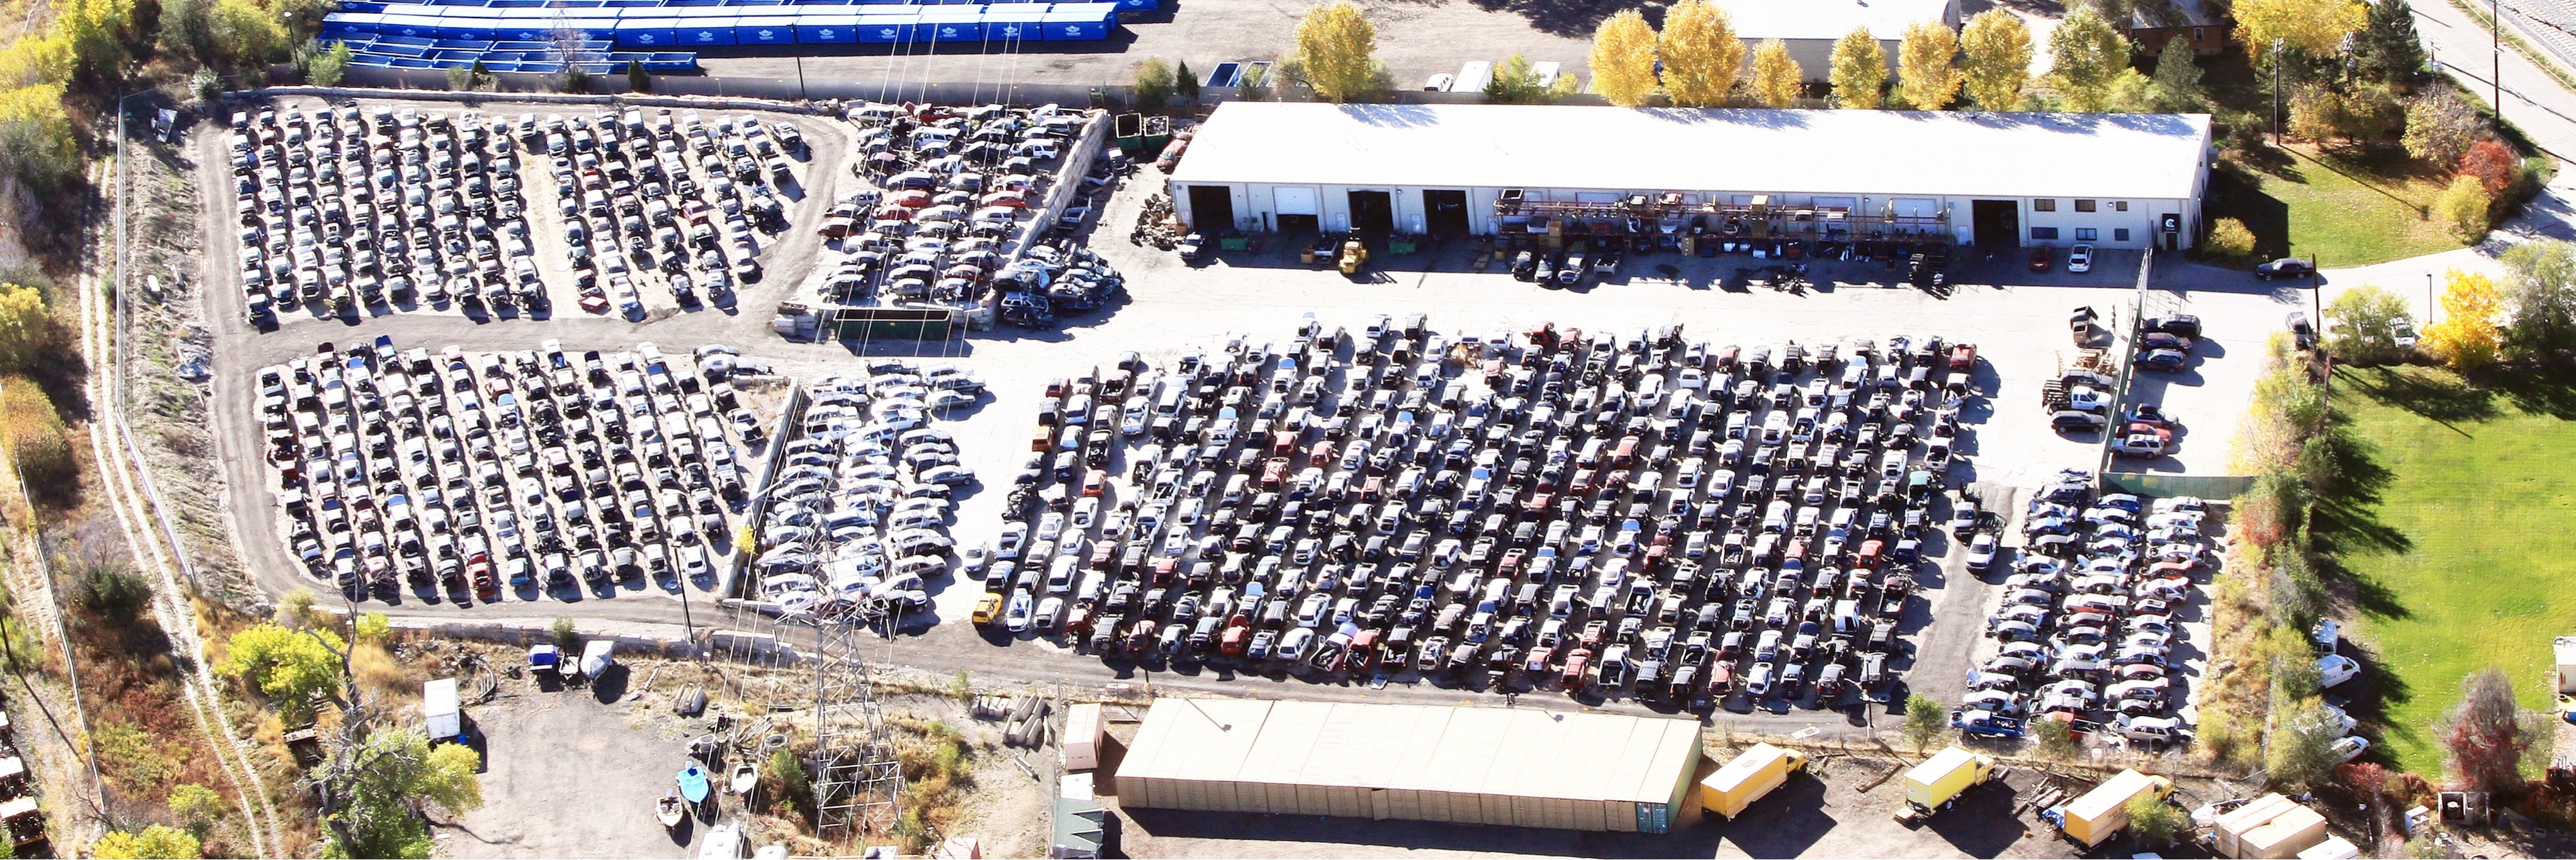 
Buy from the Best Salvage Yard in Denver: Central Auto Parts